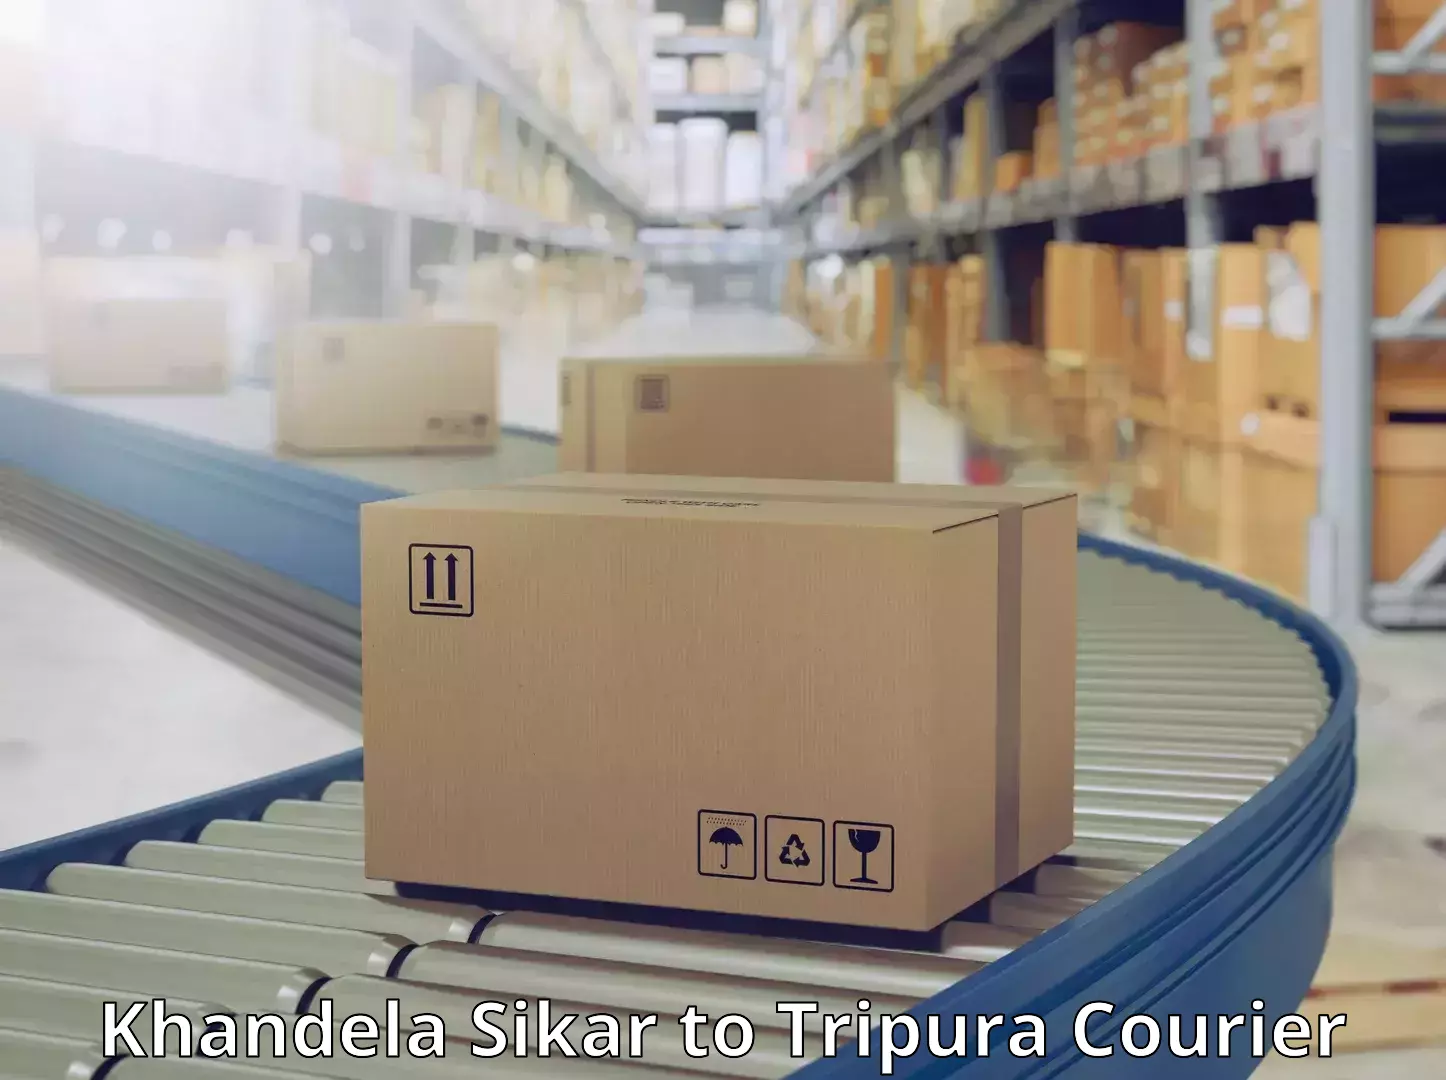 State-of-the-art courier technology Khandela Sikar to Bishalgarh